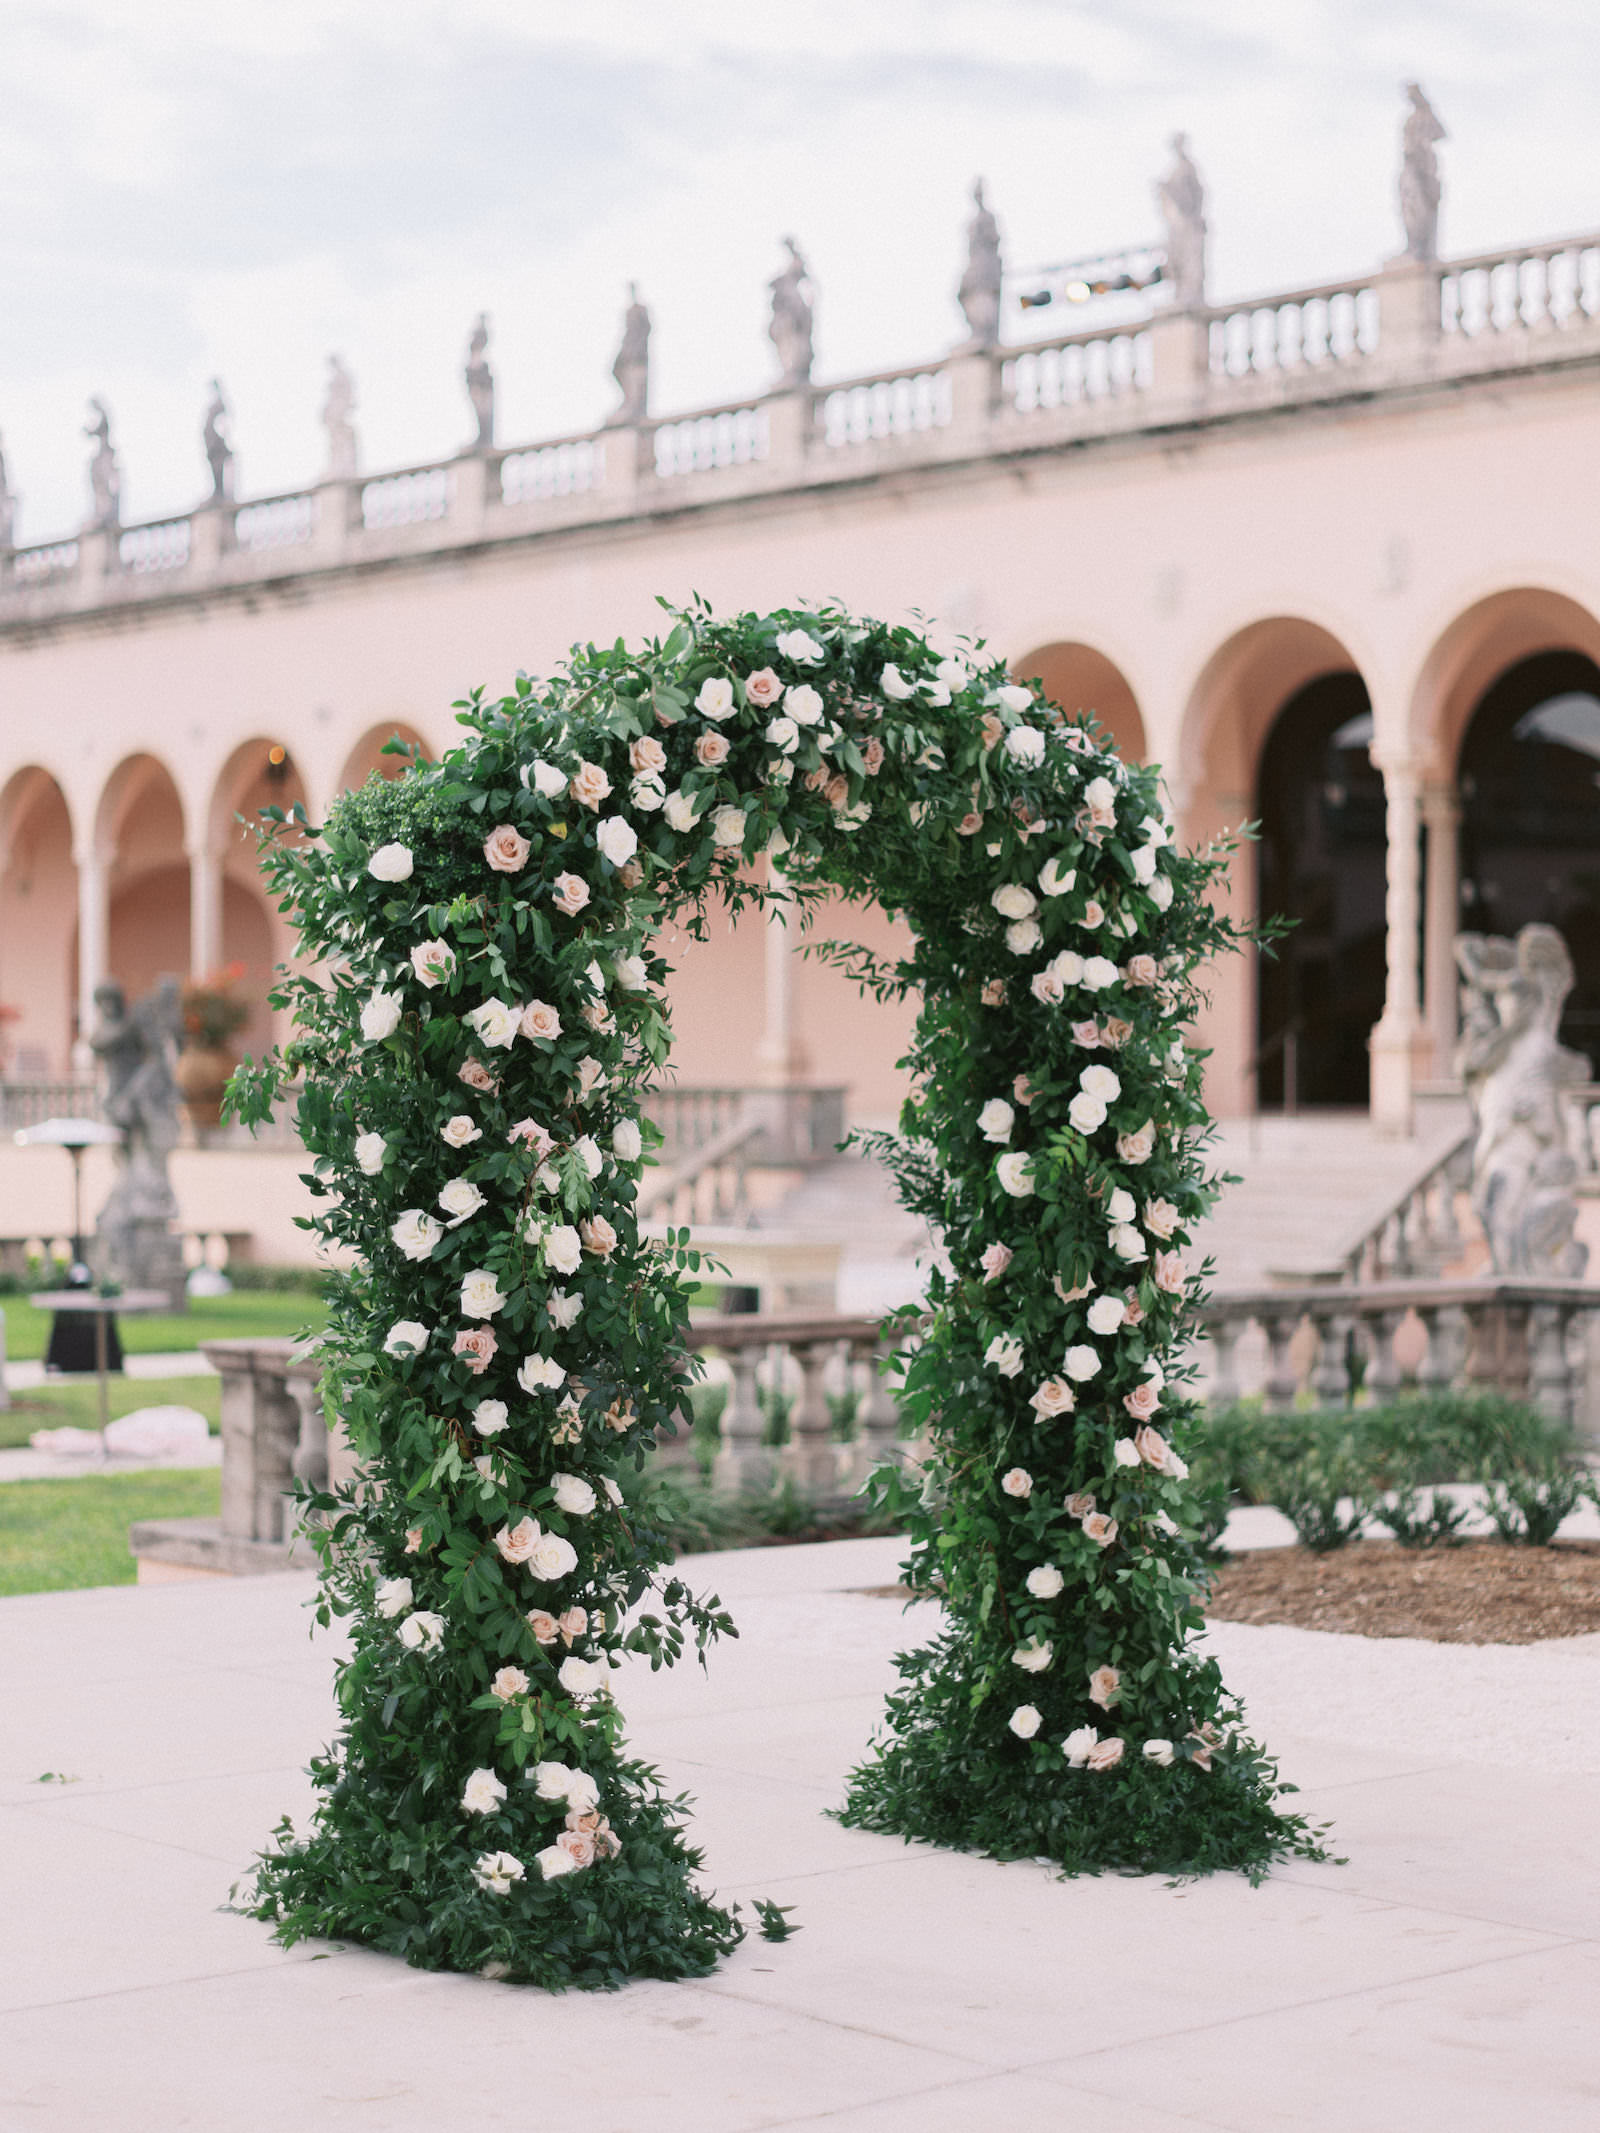 Fairytale Inspired Florida Wedding Ceremony at The Ringling Museum of Art Courtyard in Sarasota, Large Garden-Inspired Floral Arch with White and Blush Pink Roses | Florida Wedding Planner NK Weddings